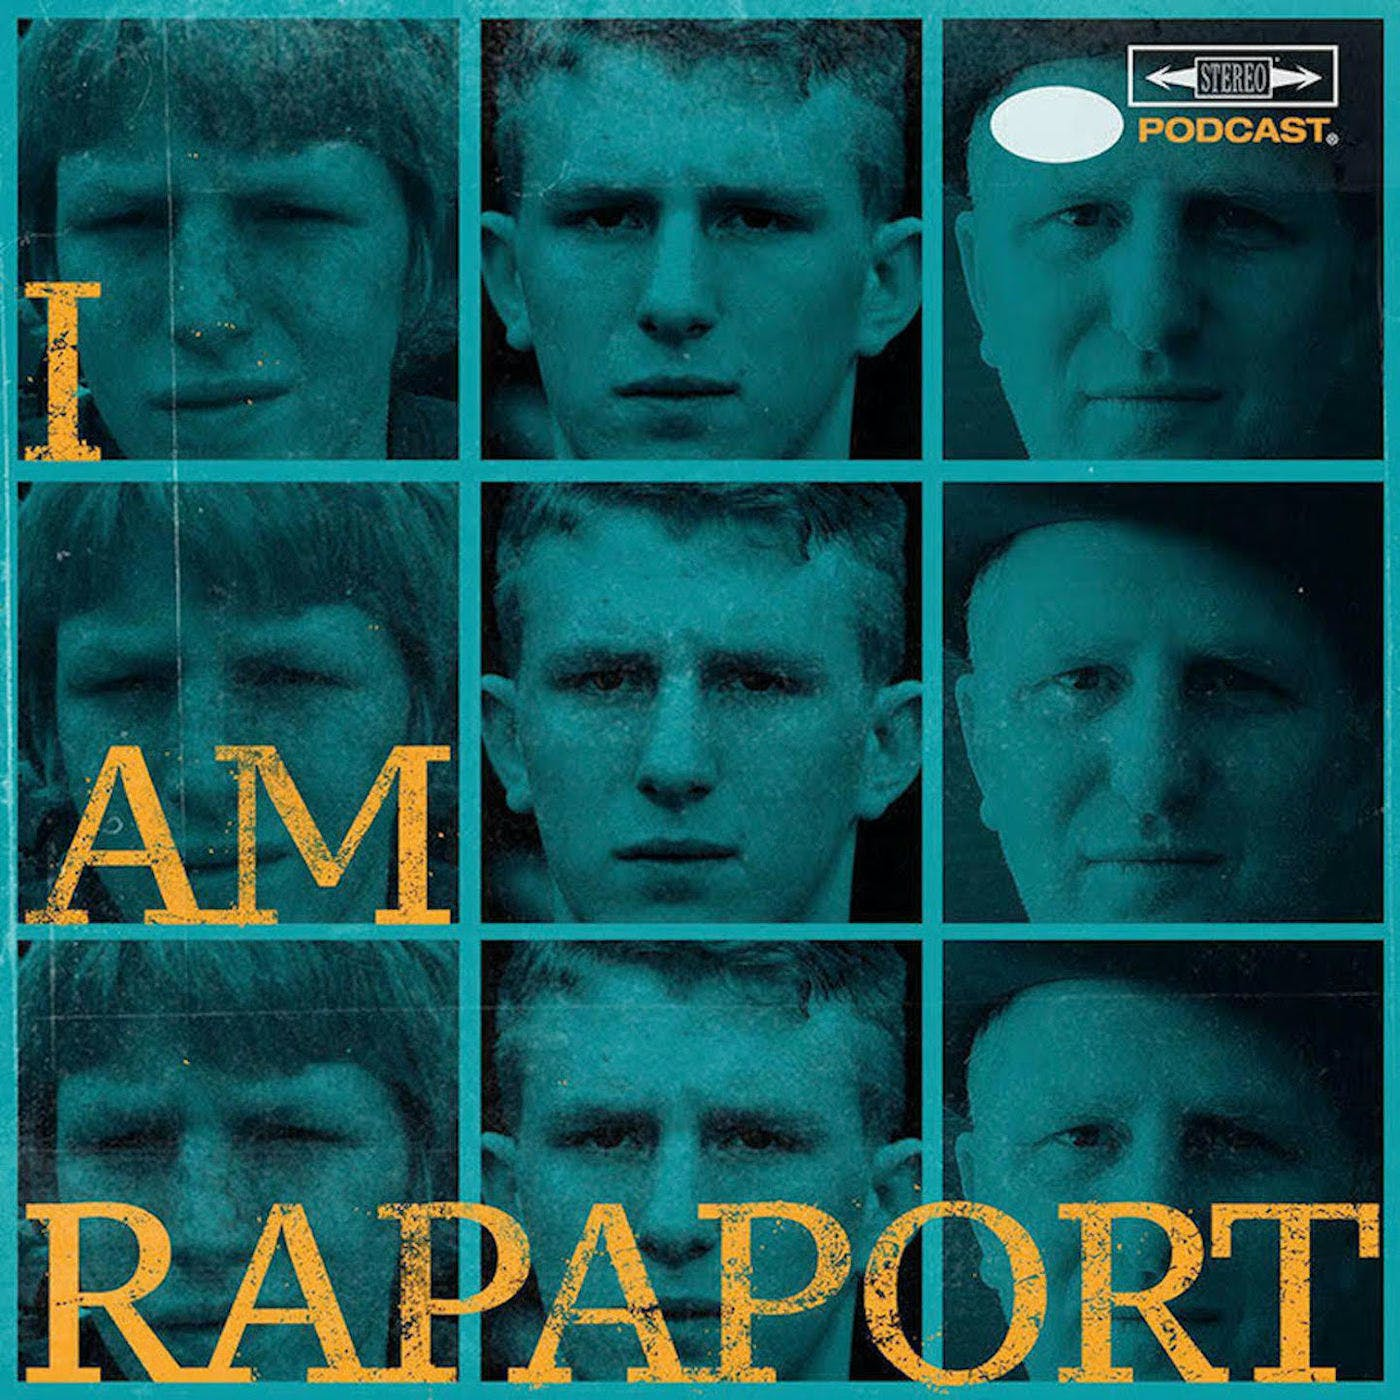 PRIMETIME EP 424 - Metta World Peace (NBA Champ)/Eli Lake (Official Unofficial I AM RAPAPORT Political Correspondent) + SICK F*CK OR BEYOND? with Judge Collins